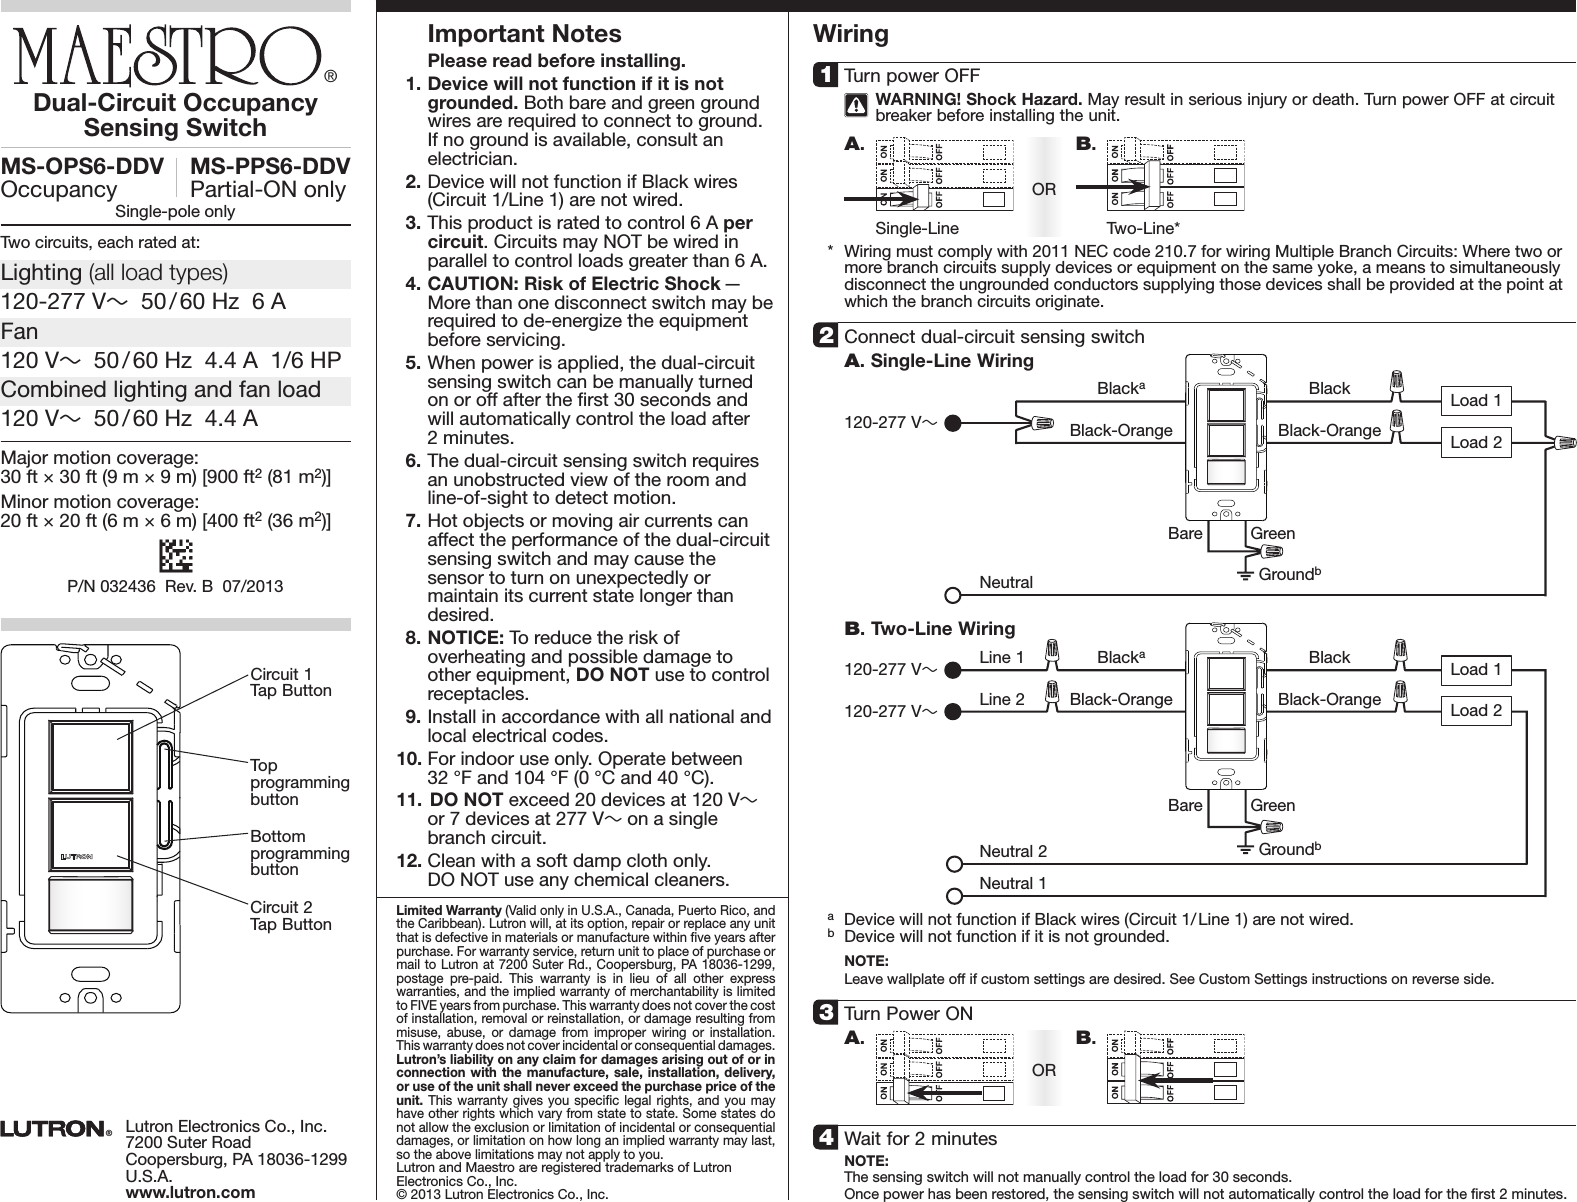 Wiring Diagram For Lutron Maestro Ms Ops5m - Search Best 4K Wallpapers